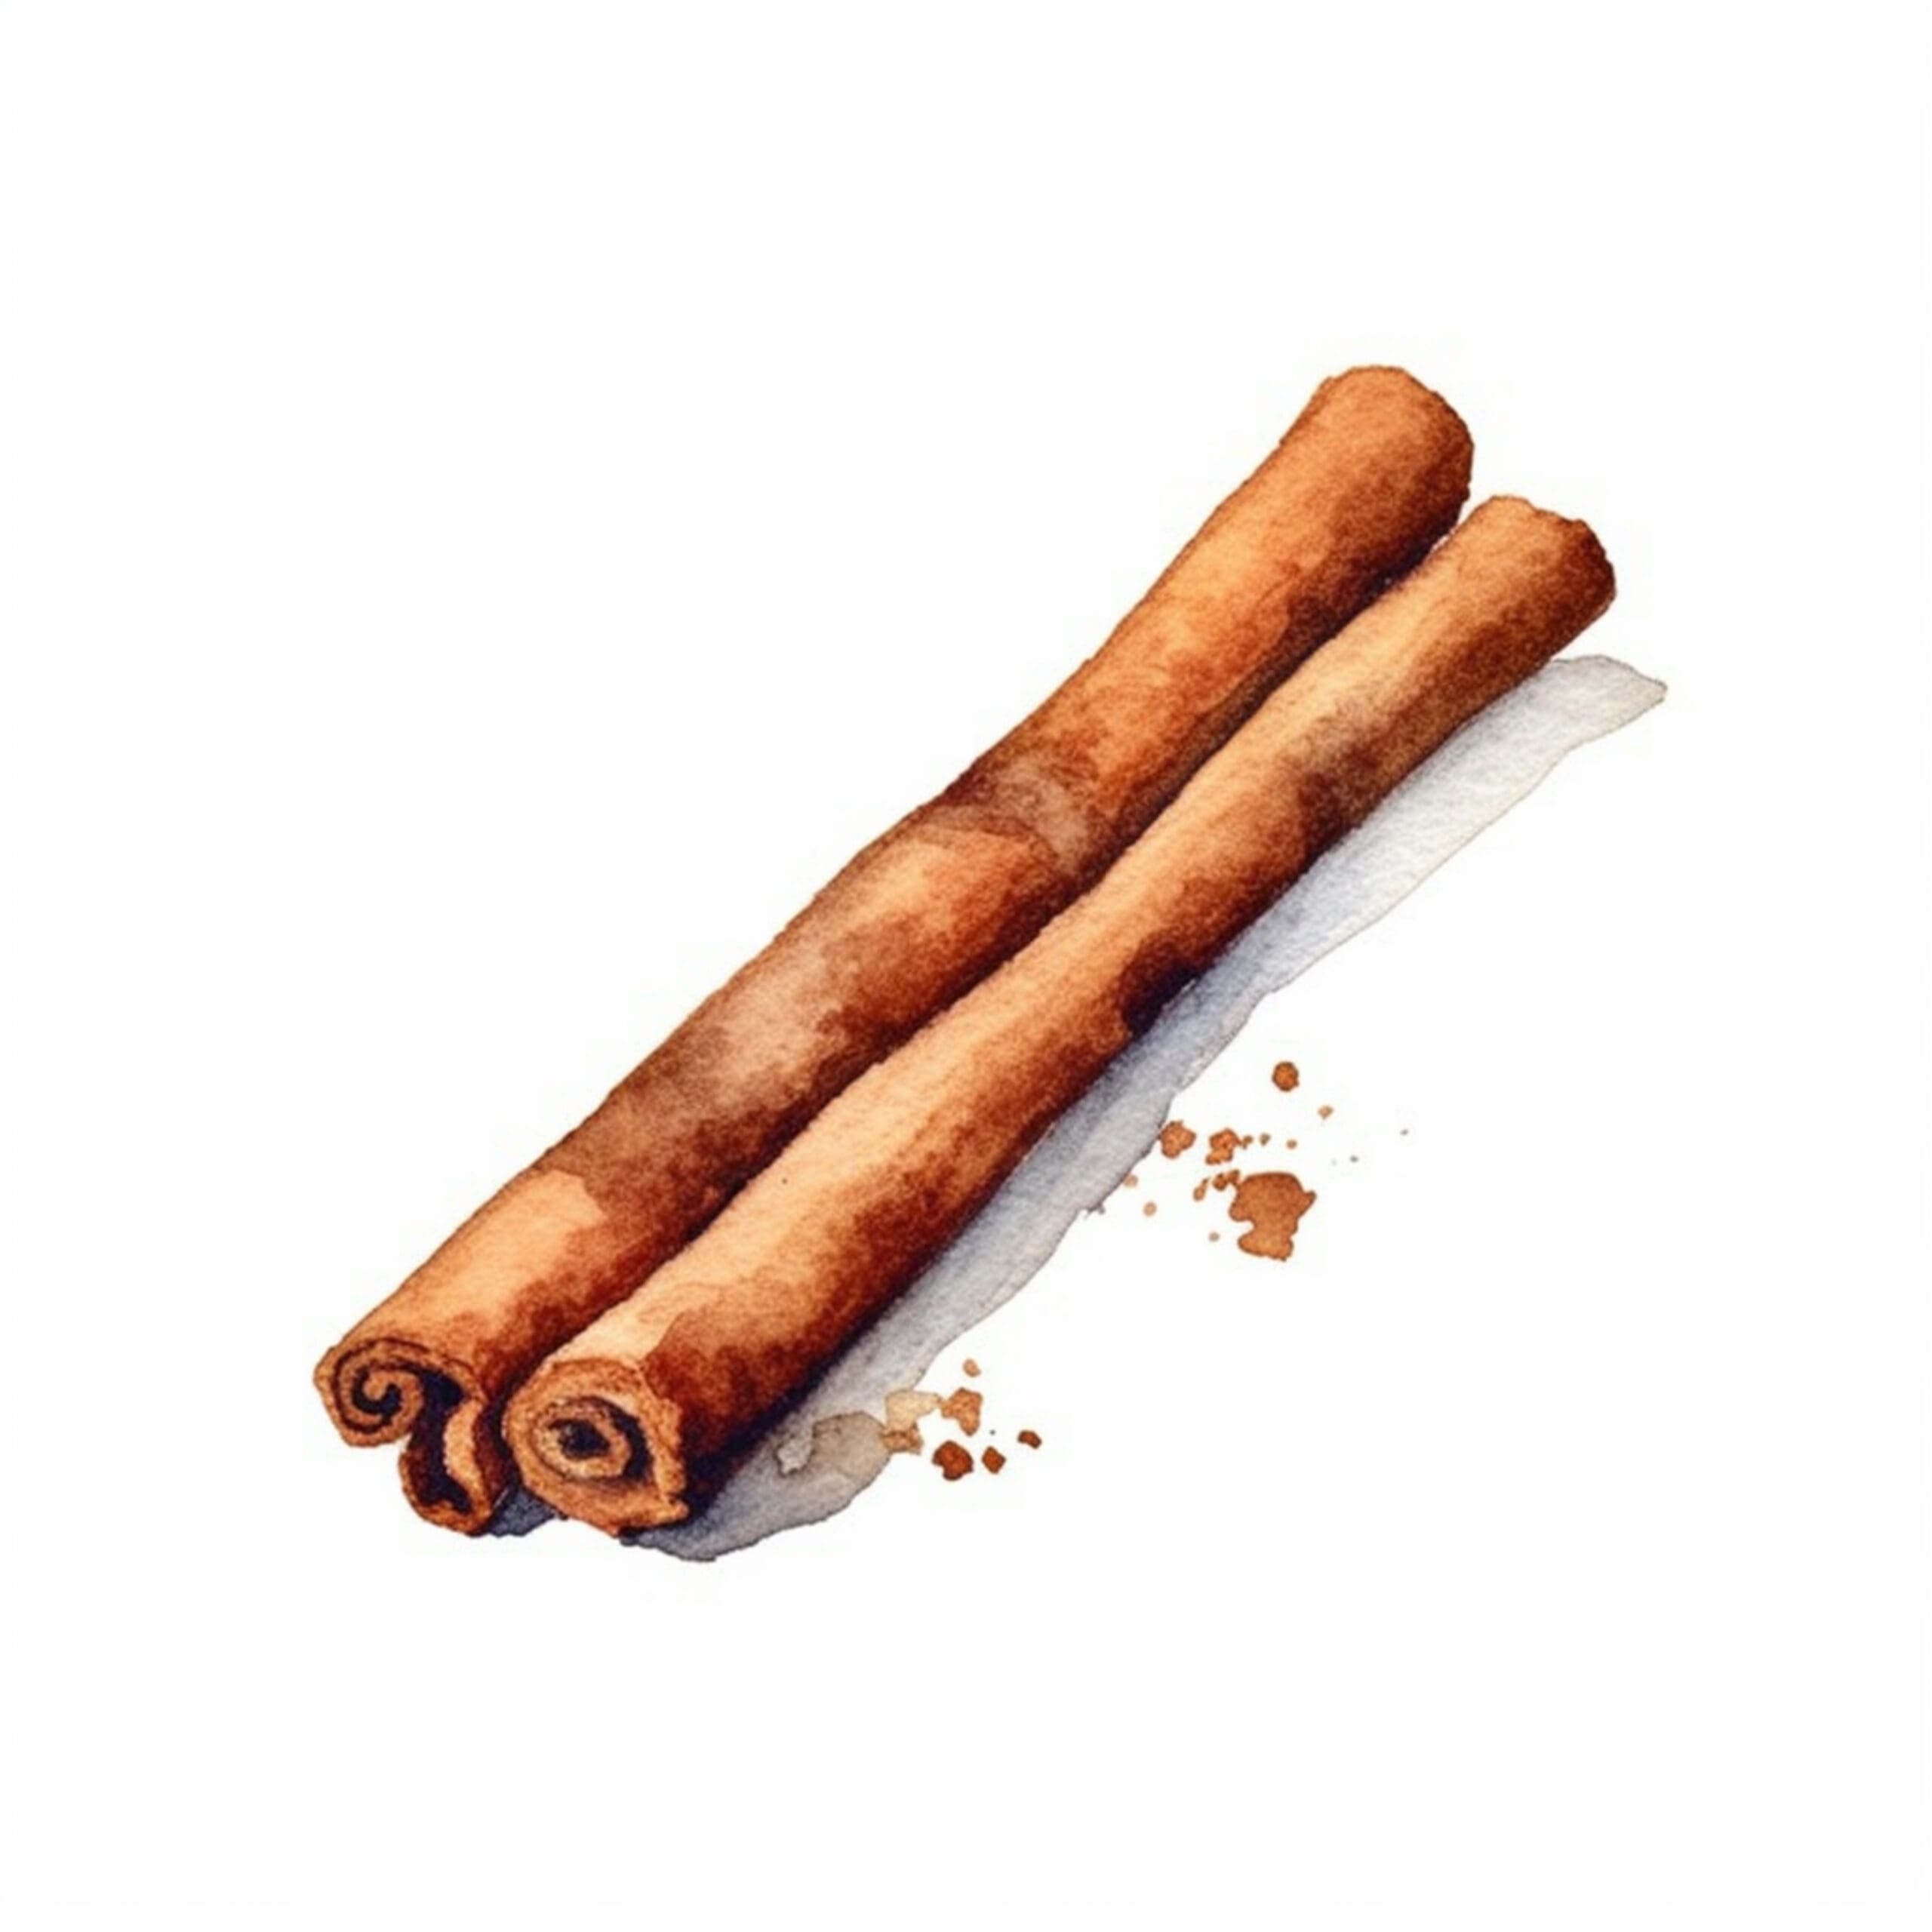 Cartoon graphic of a cheerful cinnamon stick with a chef’s hat and sunglasses on a spice-themed background.